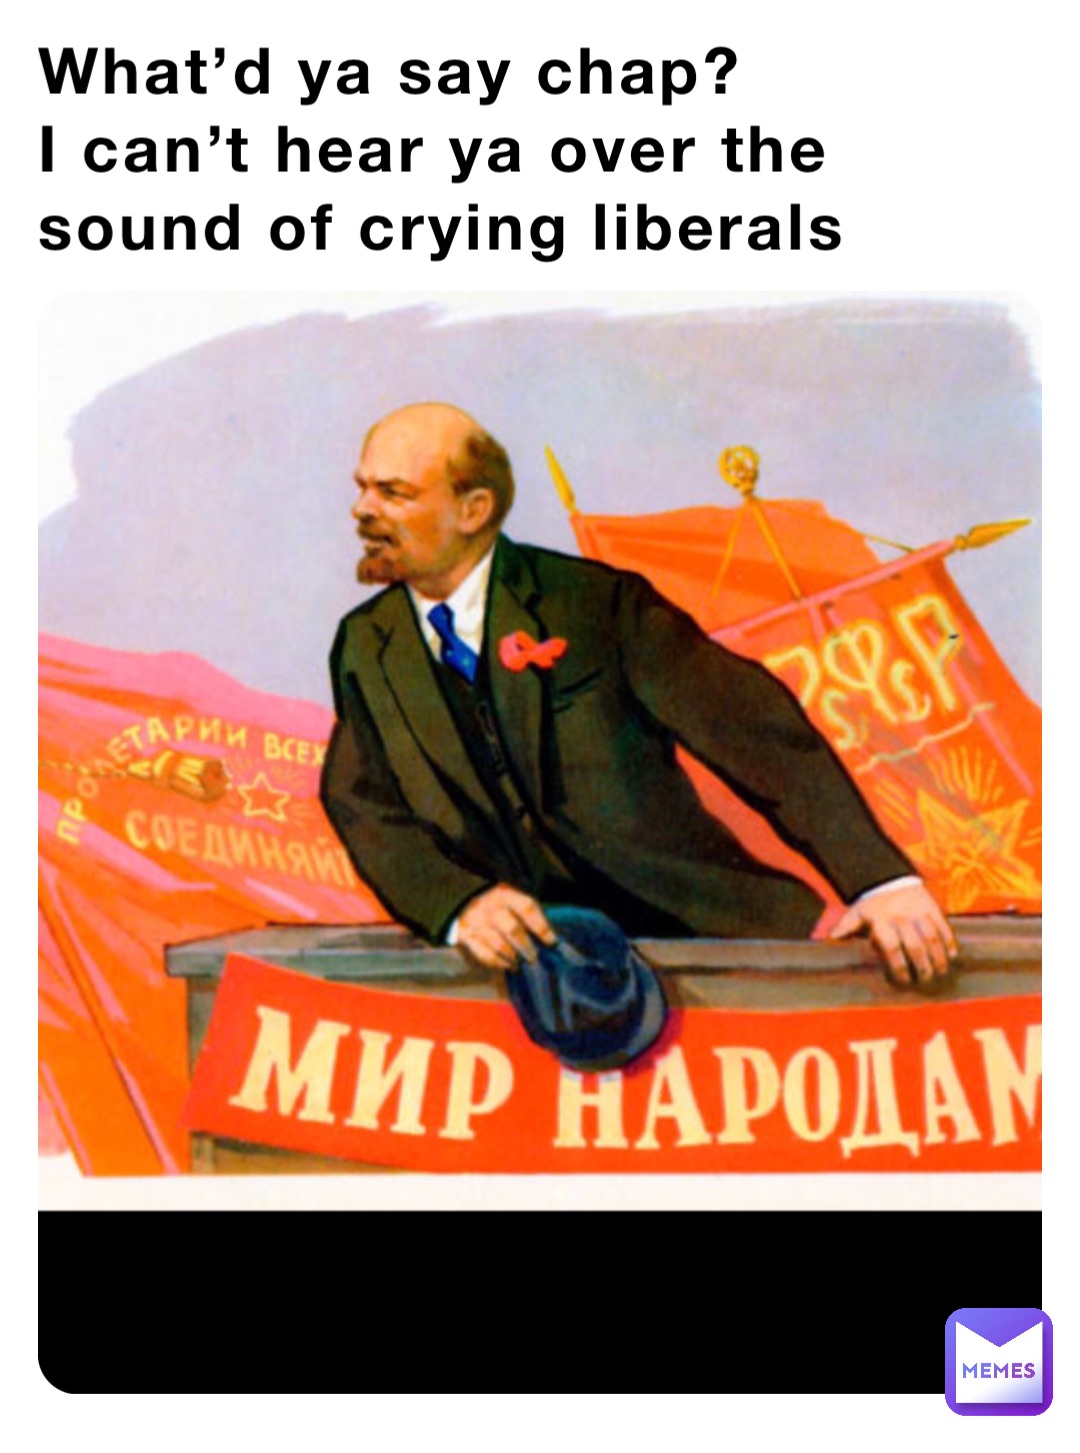 What’d ya say chap?
I can’t hear ya over the sound of crying liberals